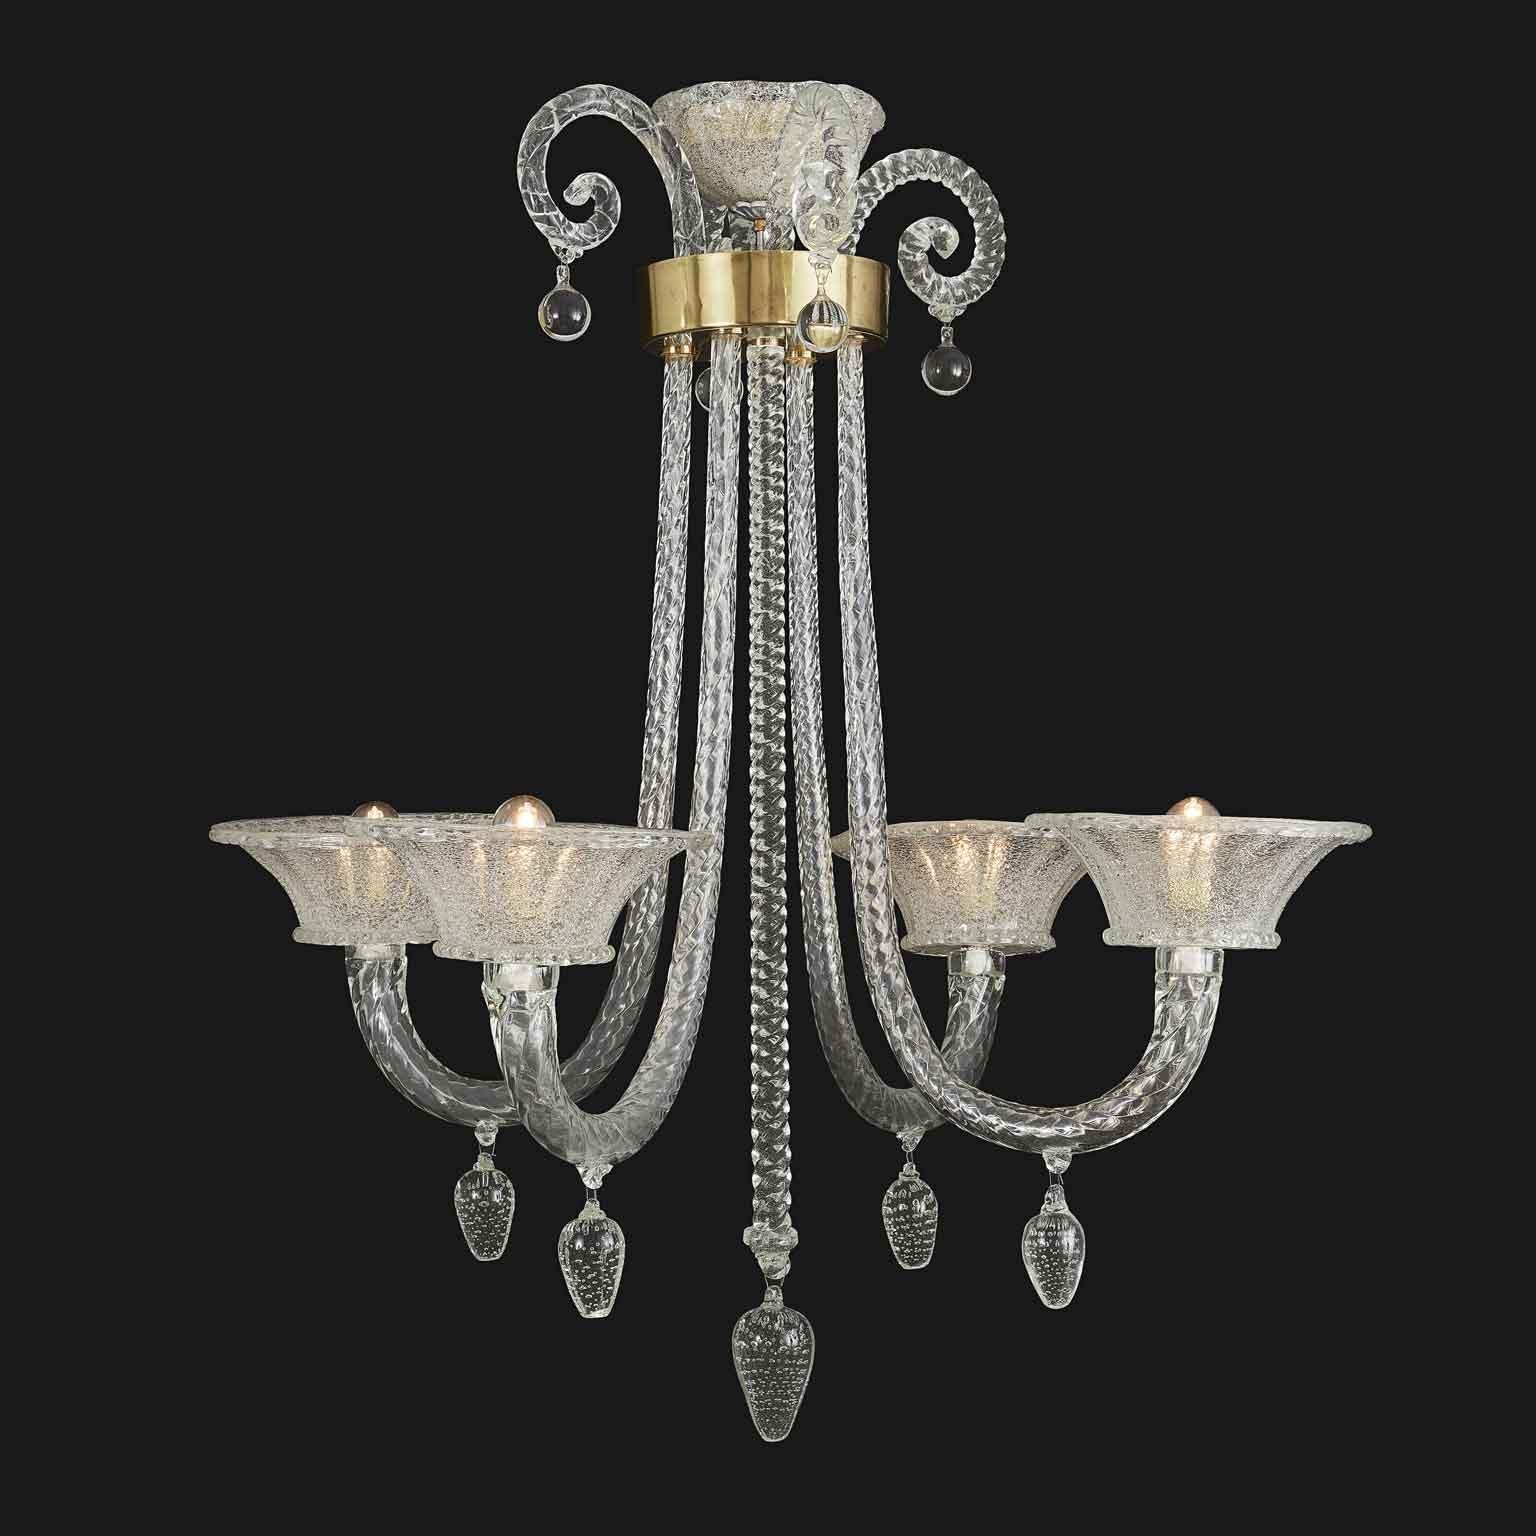 20th century Italian Venetian Art Deco four-light chandelier, a timeless Murano clear blown glass dating back to 1940s with four lights E14 contained within four large glass bowls, four upwards corollas. 
This antique hand-made chandelier realized